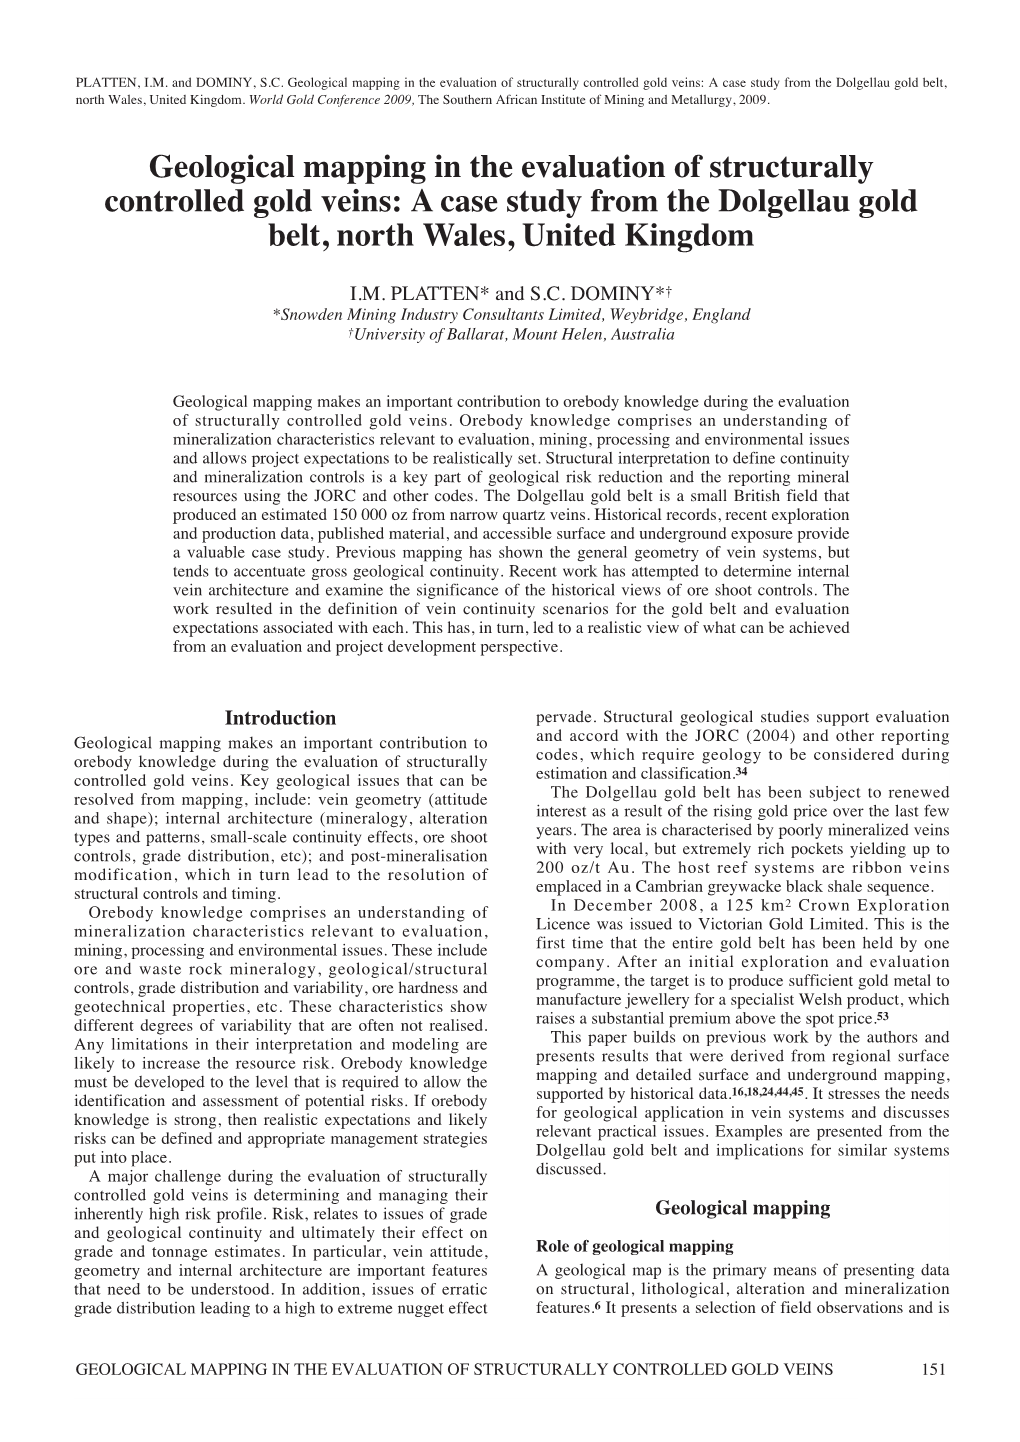 Geological Mapping in the Evaluation of Structurally Controlled Gold Veins: a Case Study from the Dolgellau Gold Belt, North Wales, United Kingdom